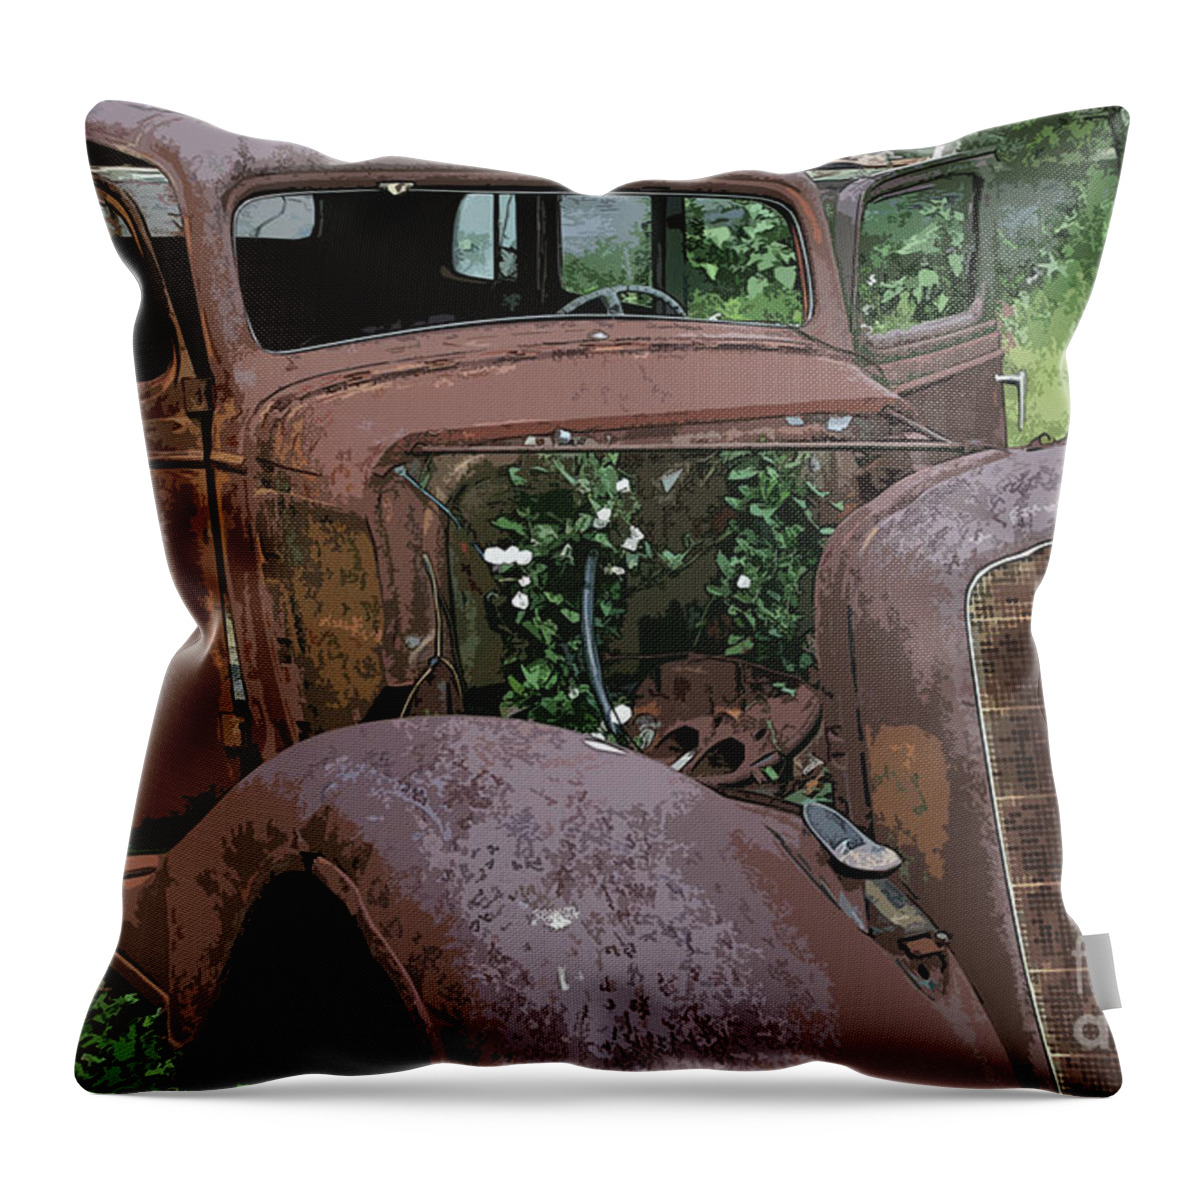 Rusted Throw Pillow featuring the photograph Rusted But With Flowers by Neala McCarten